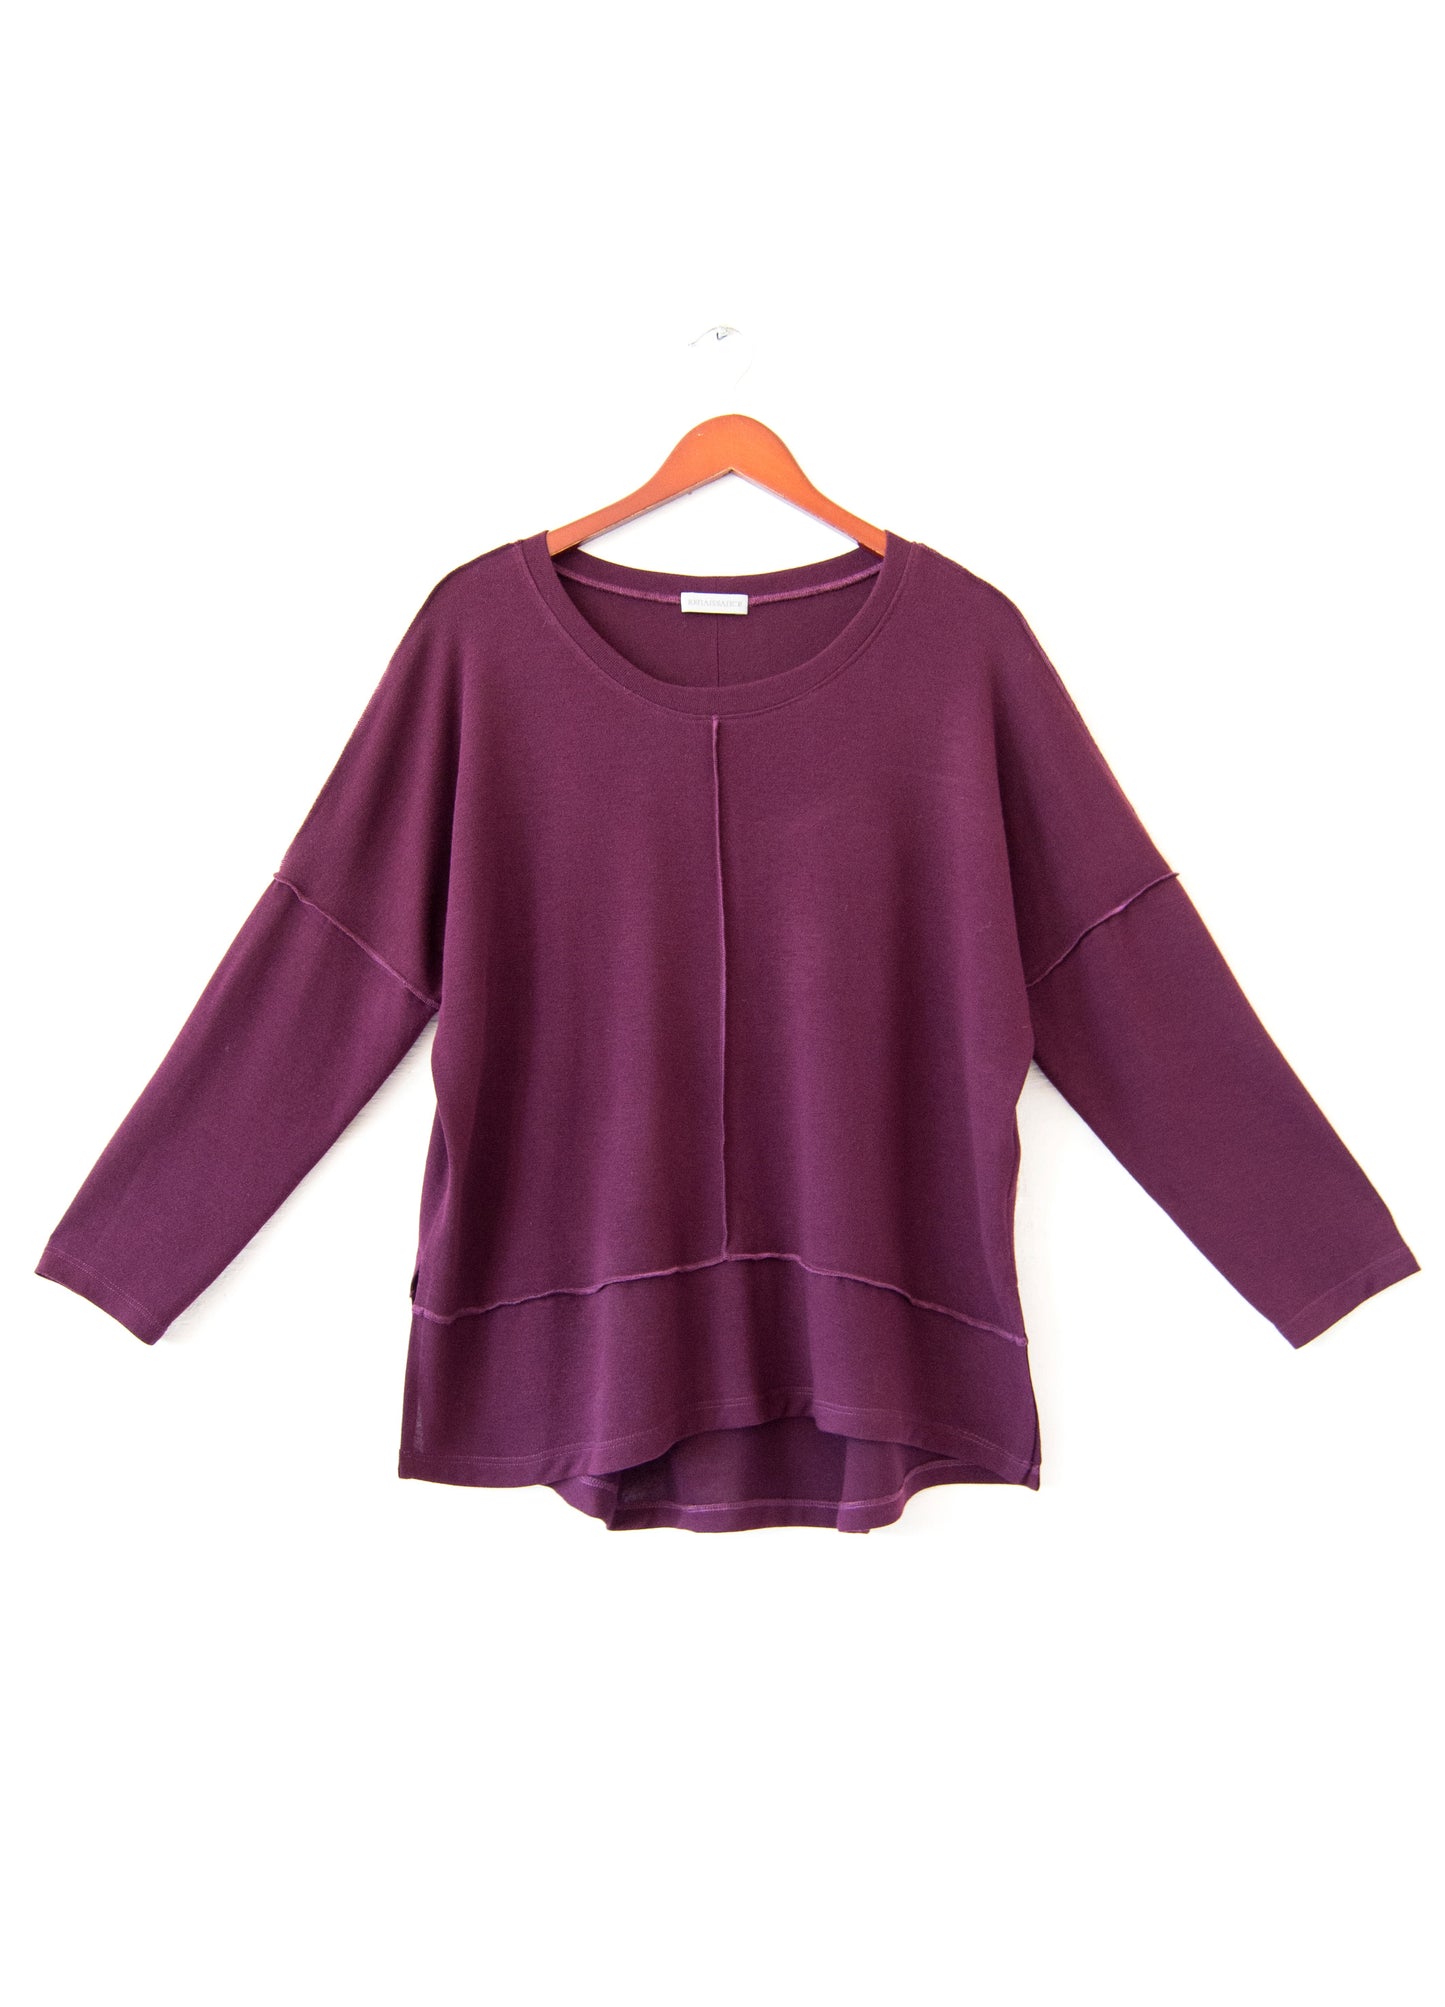 Nelly pullover in Plum knit